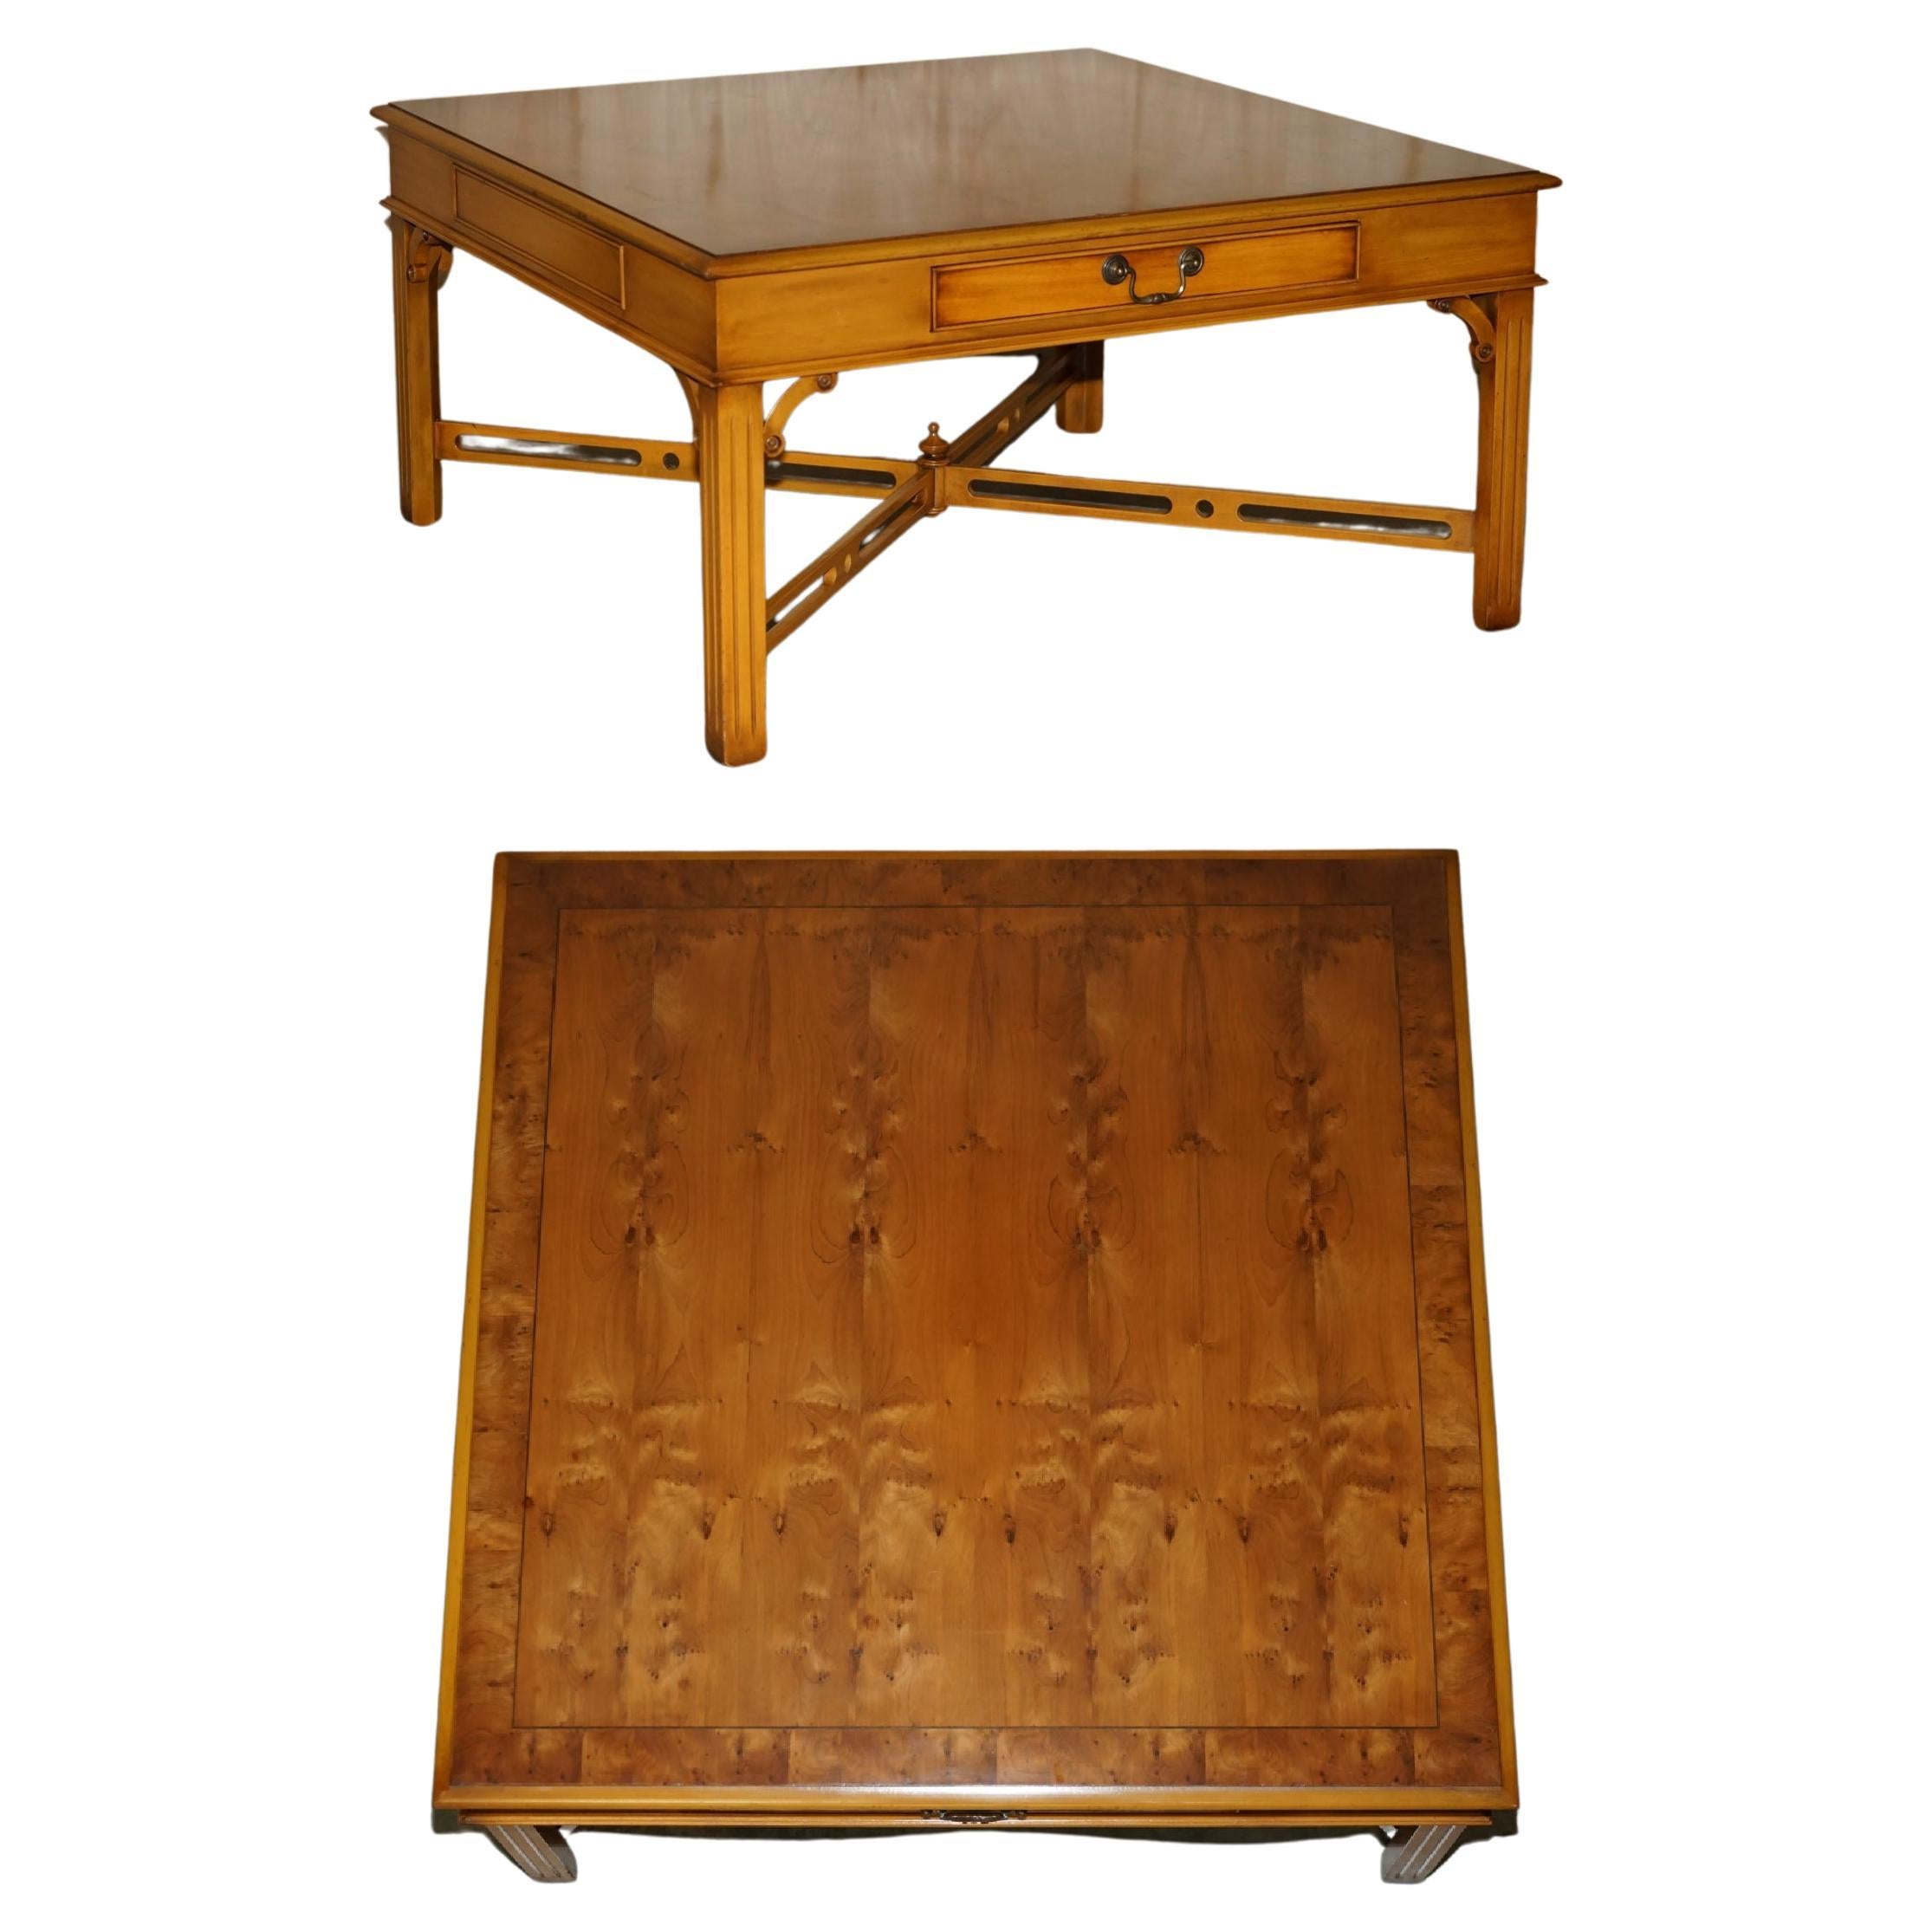 LOVELY BURR YEW WOOD TABLE COFFEE TABLE WiTH THOMAS CHIPPENDALE STRETCHES